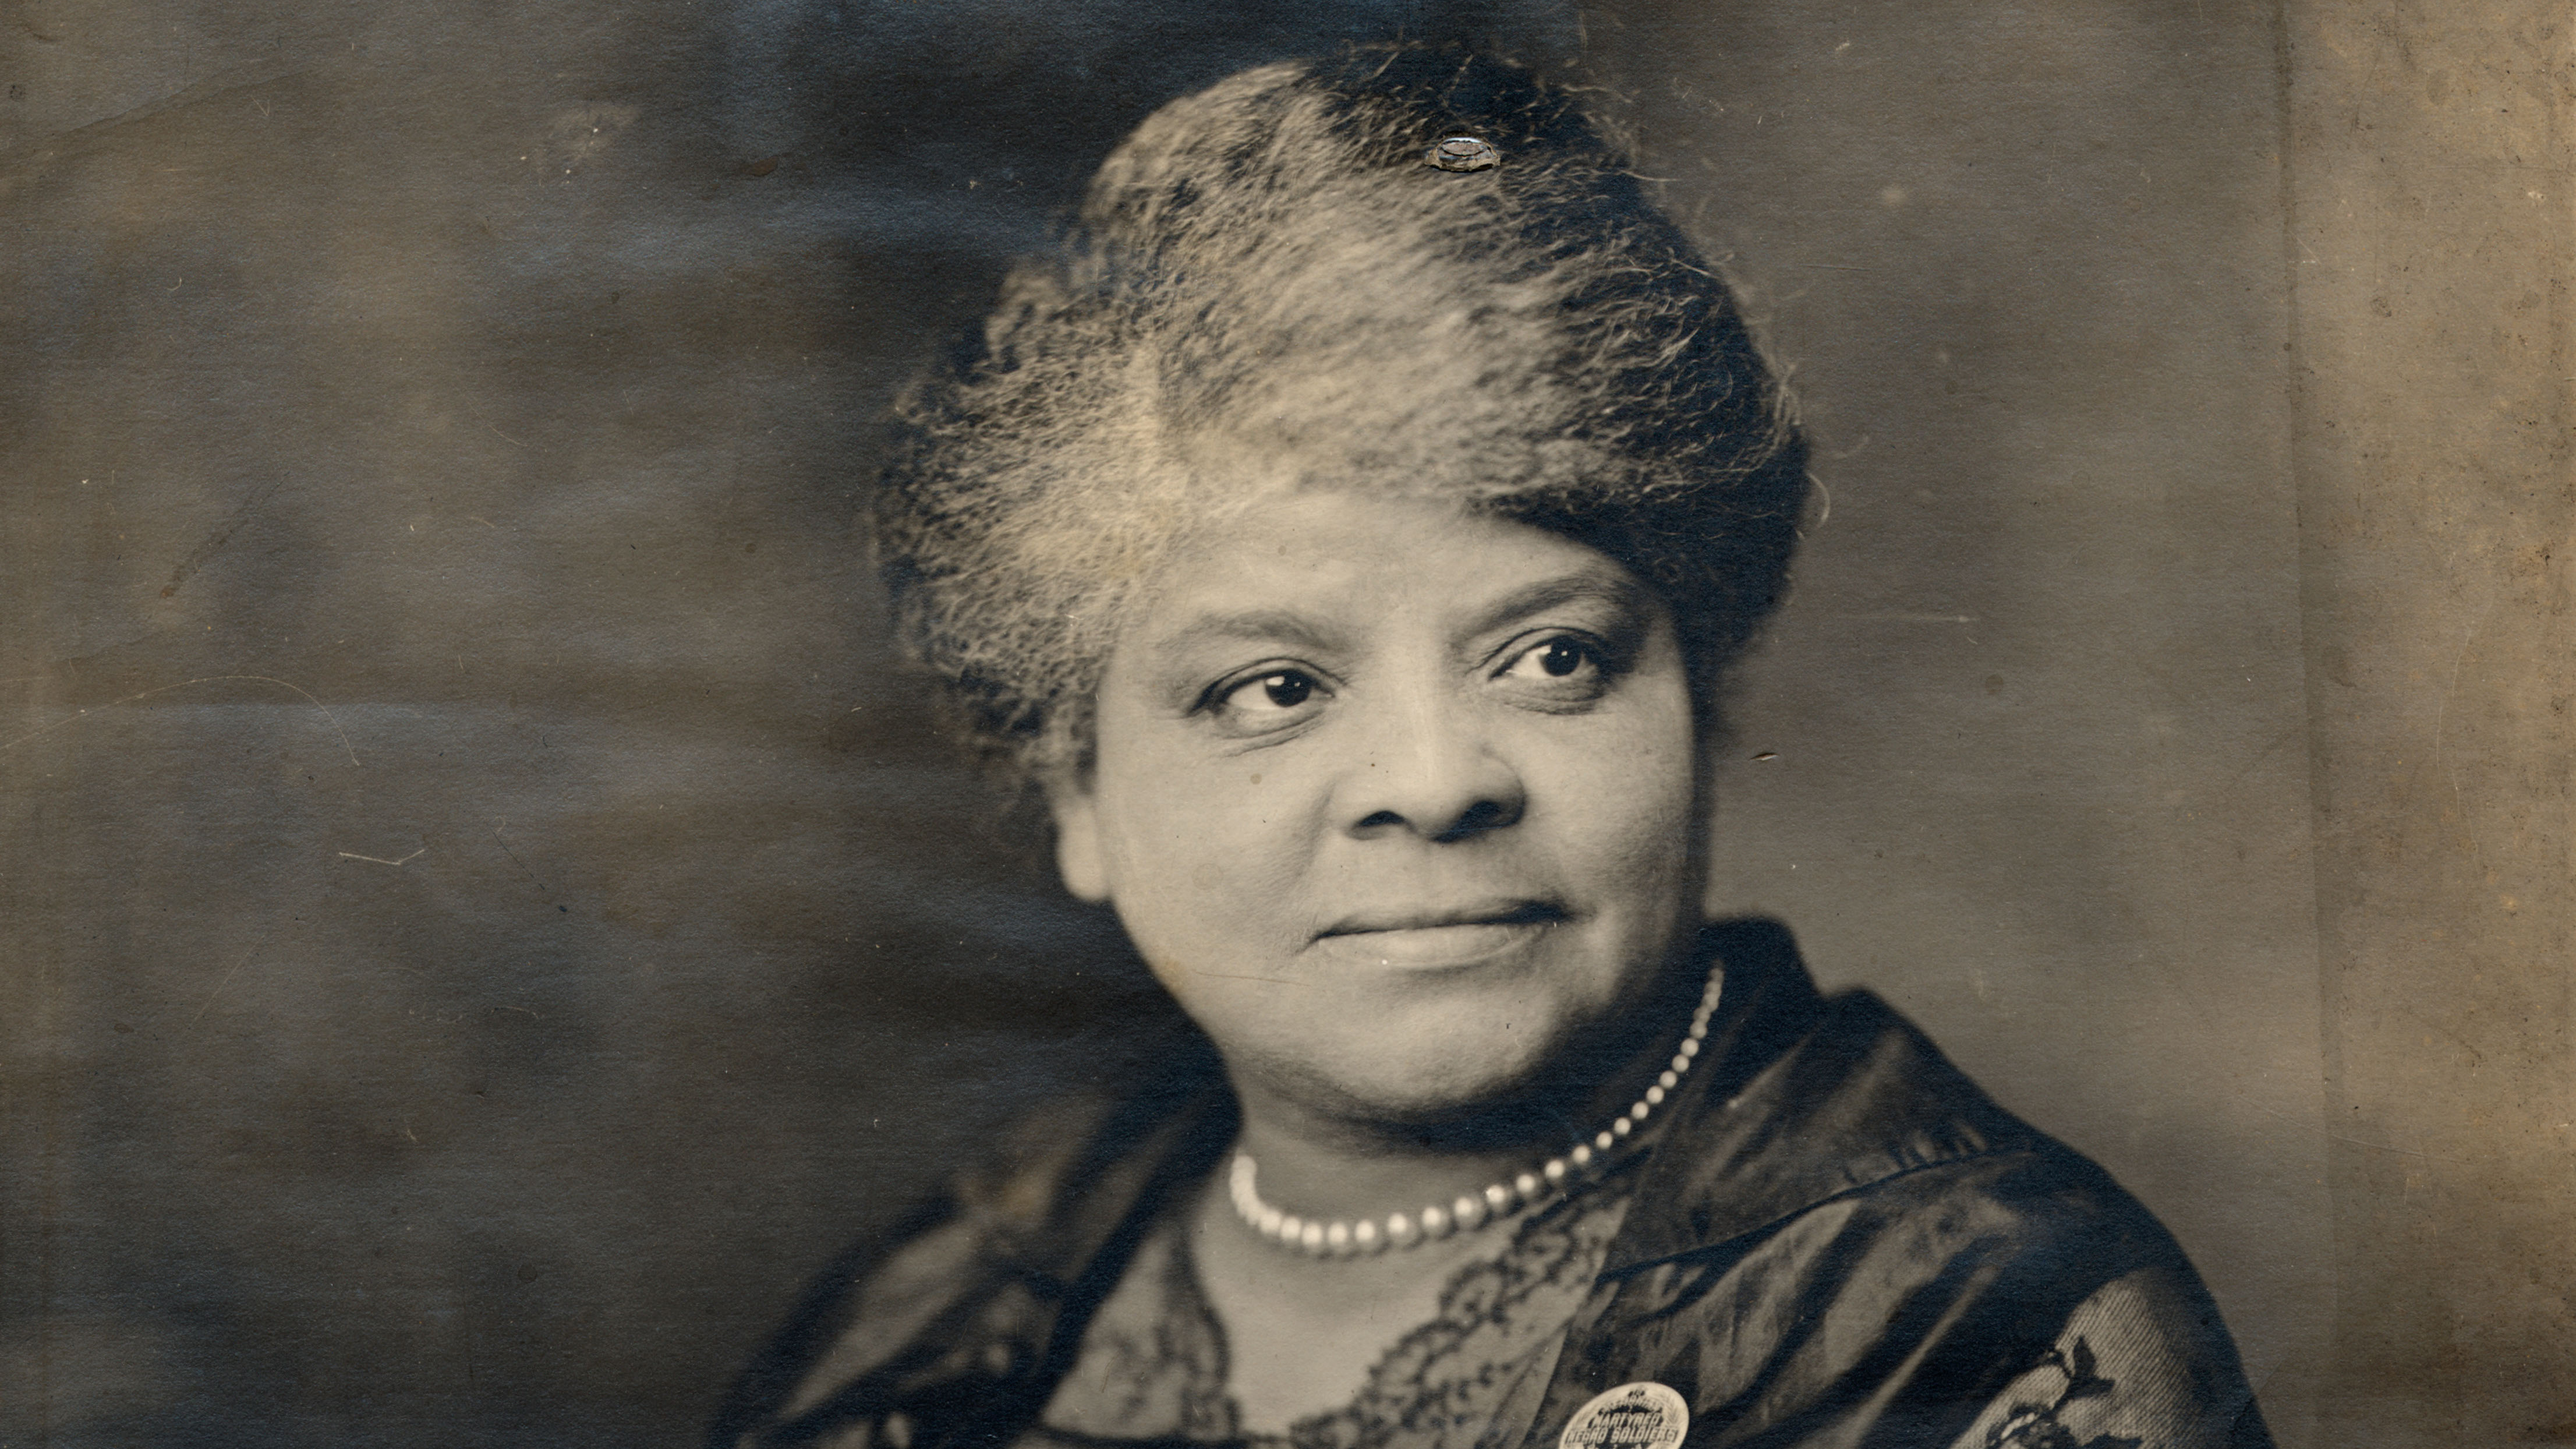 Ida B. Wells, pictured in 1917. Photo Credit: University of Chicago Photographic Archive, apf1-08641, Hanna Holborn Gray Special Collections Research Center, University of Chicago Library